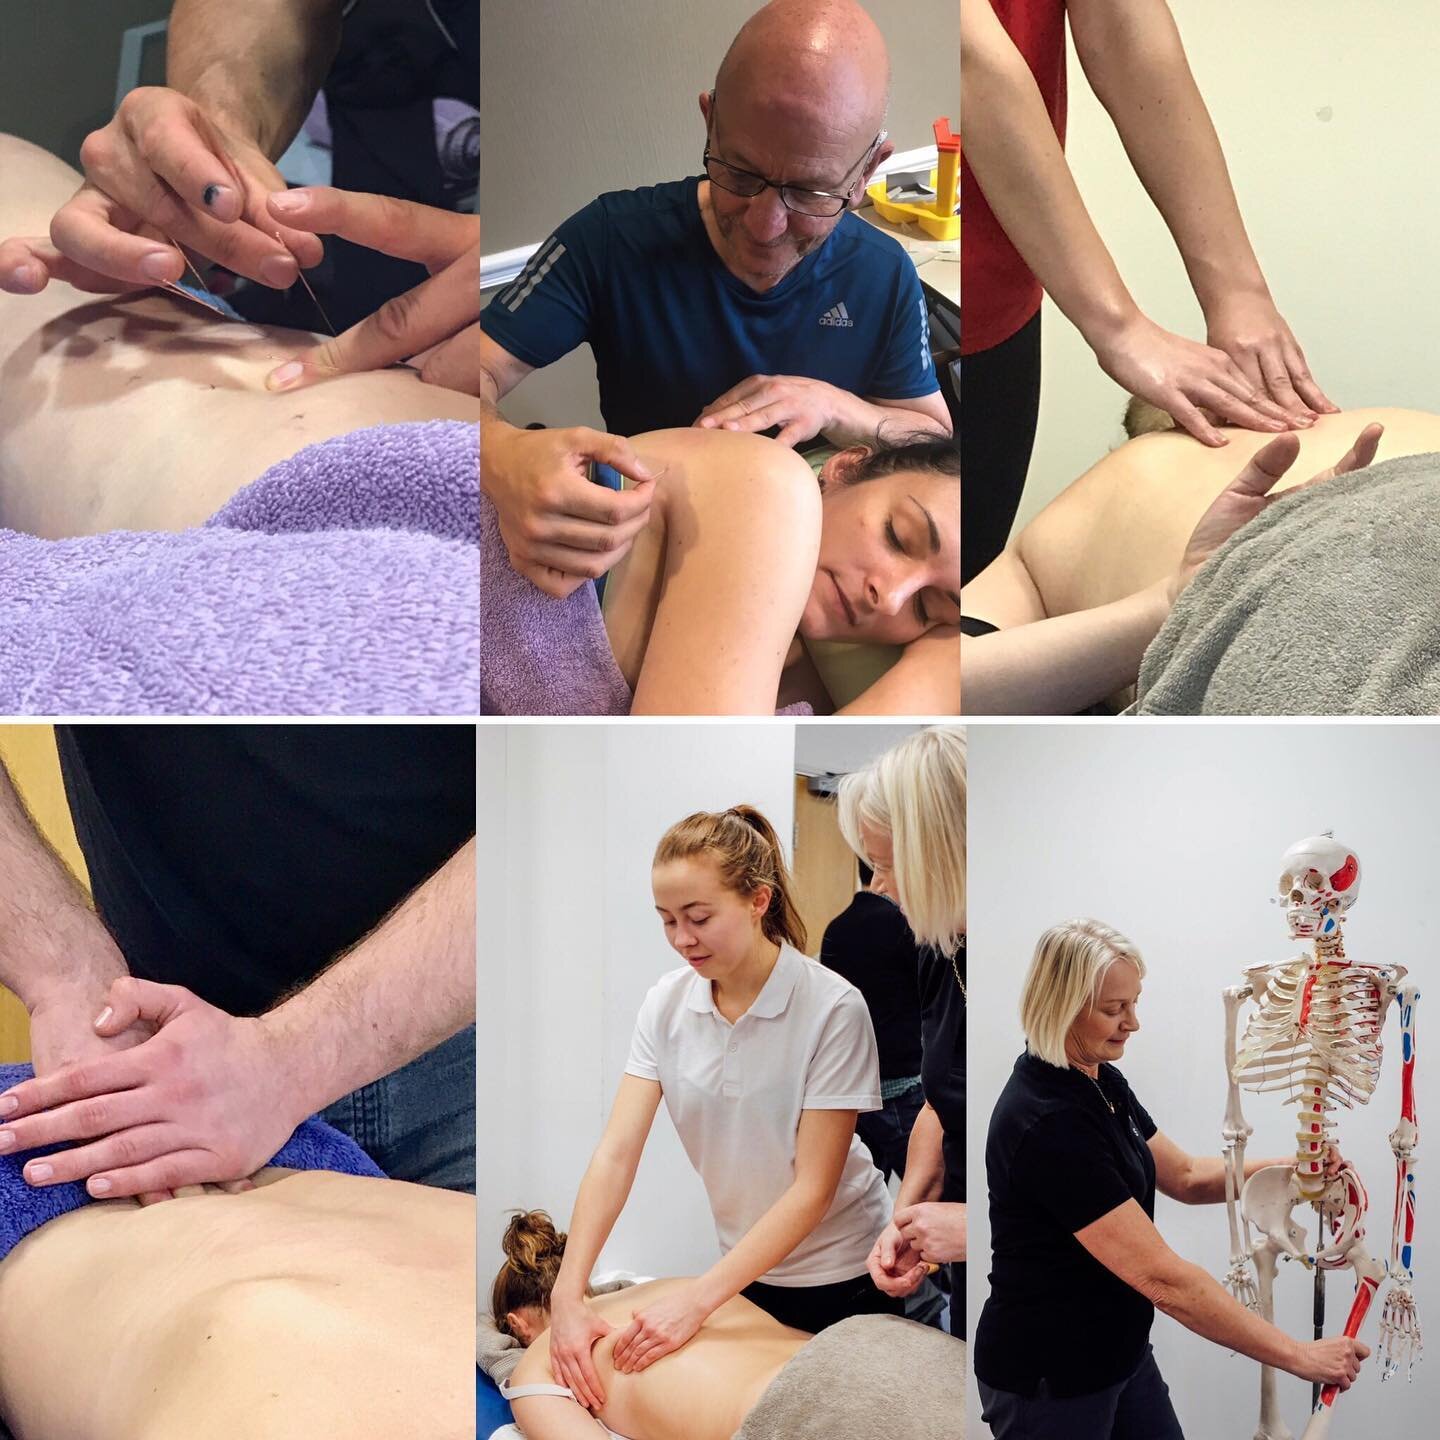 With courses starting next month, there's never been a better time to start your SPS, Sports Massage journey. The programme includes all the core elements required by the Professional Body and gives all course participants access to help &amp; suppor